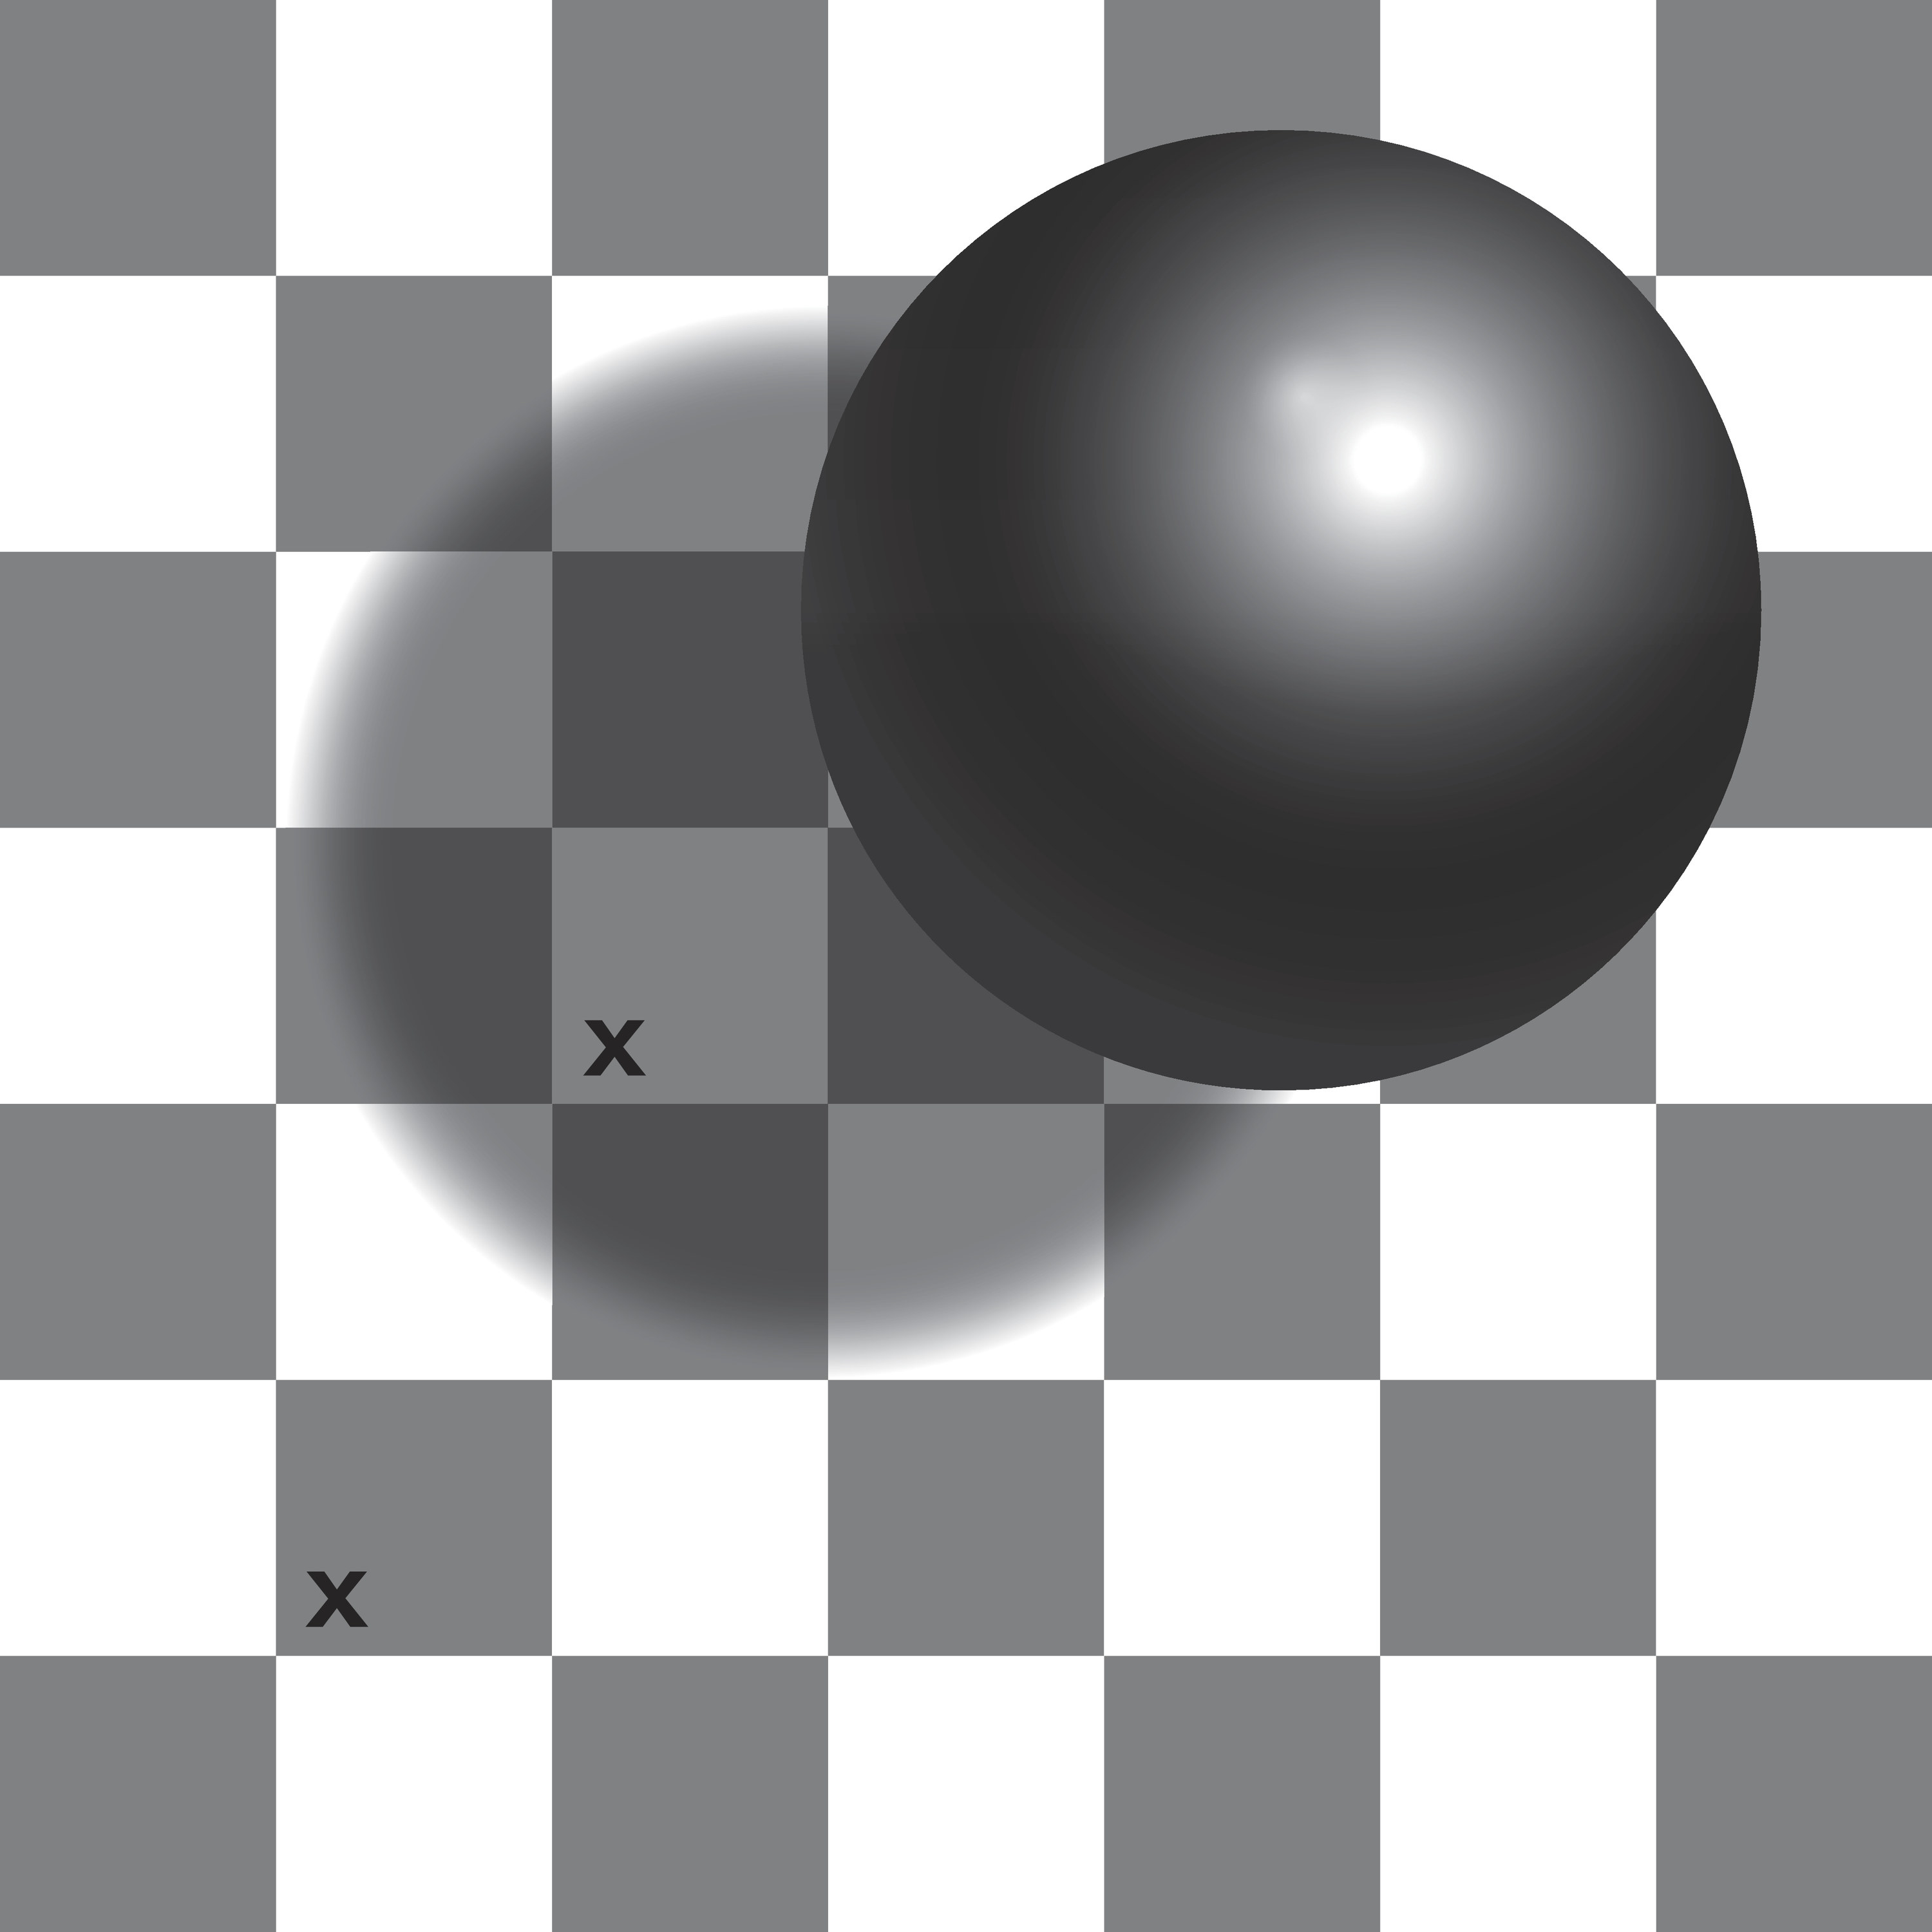 Checker shadow illusion - the two squares with x mark are the same shade of gray.